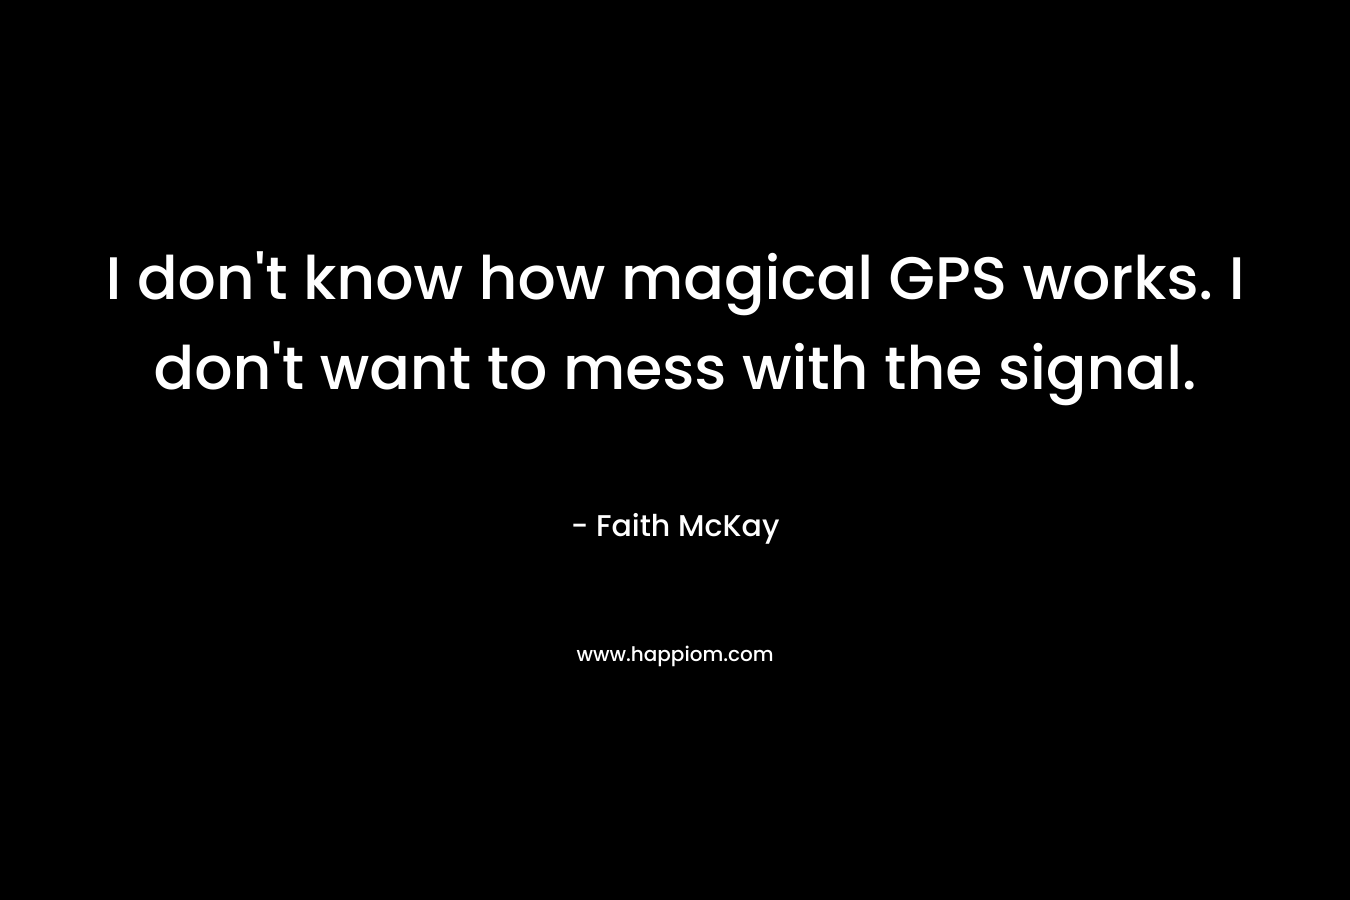 I don’t know how magical GPS works. I don’t want to mess with the signal. – Faith McKay